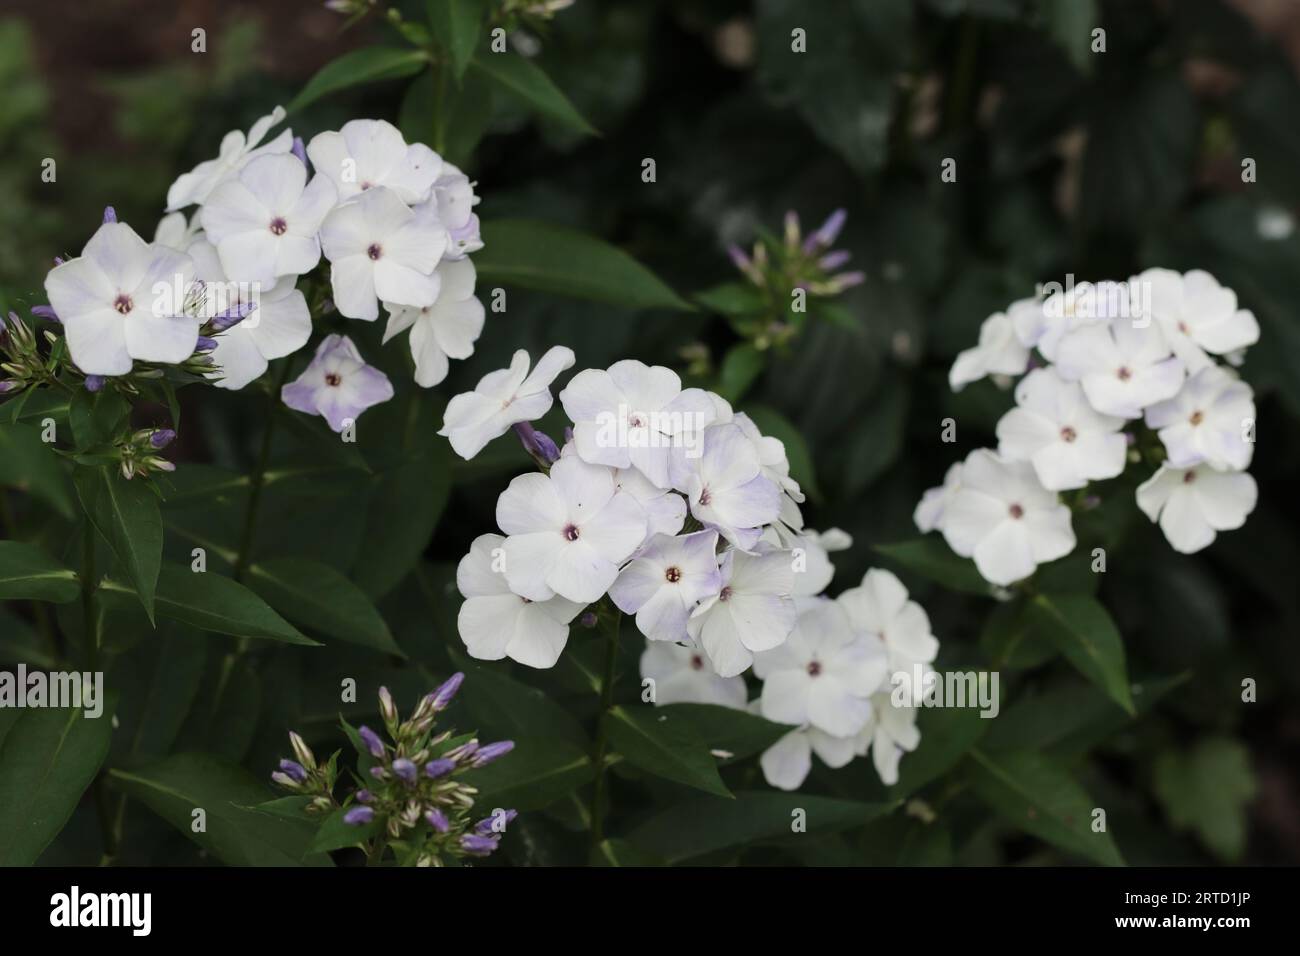 Close-up of beautiful white phlox paniculata flowers against a dark natural background Stock Photo